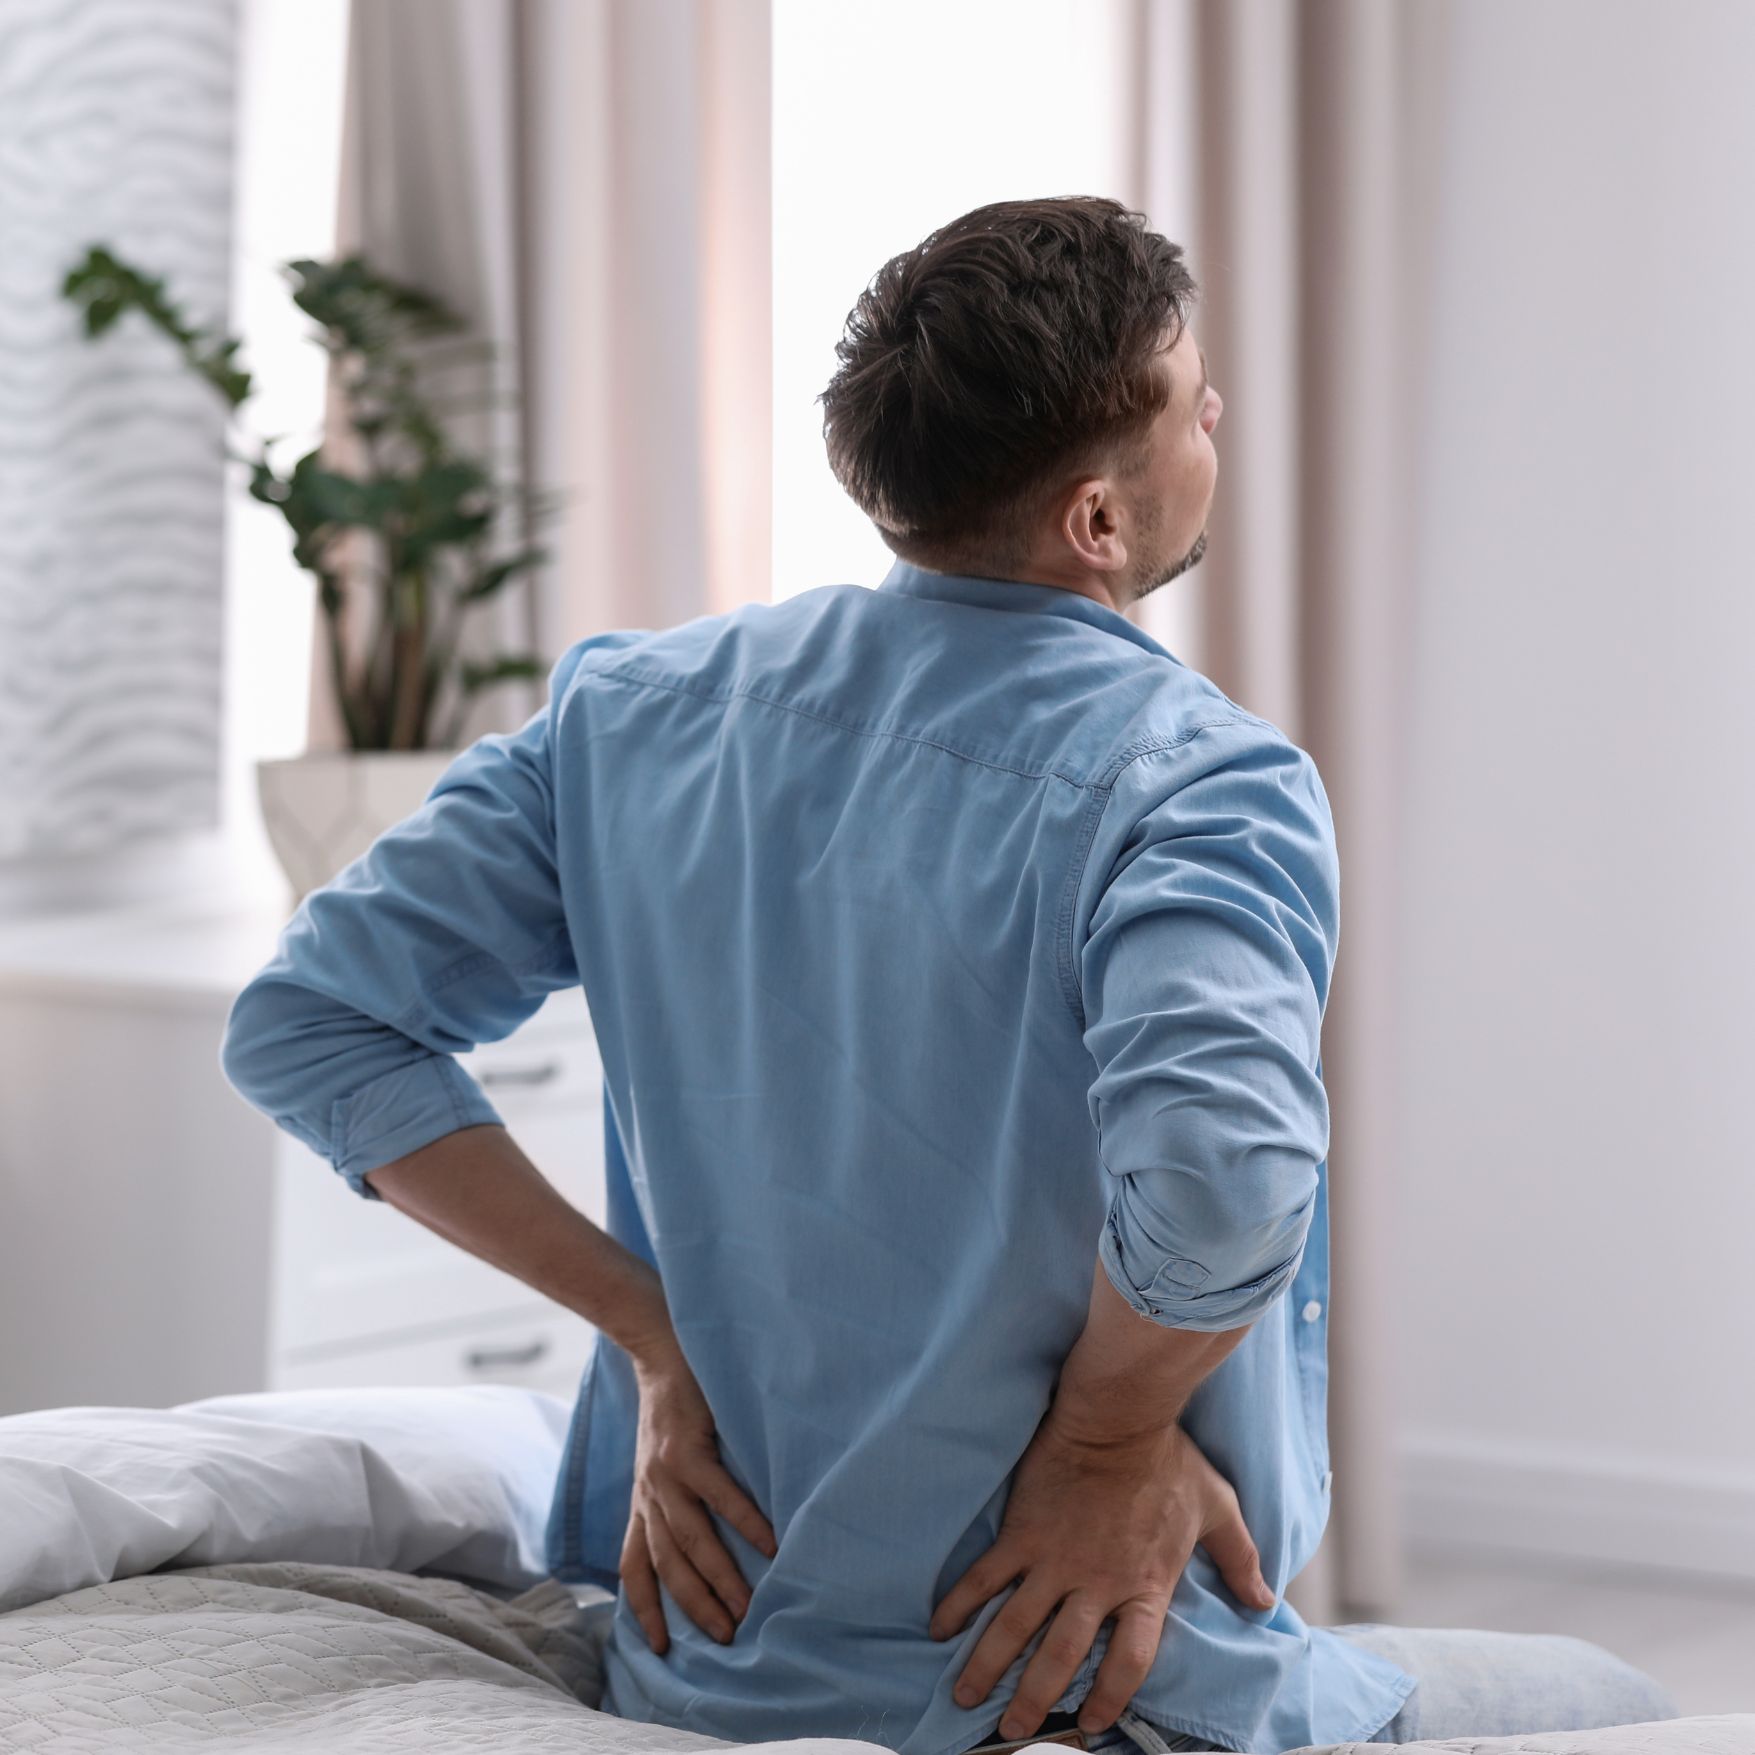 how to prevent lower back pain